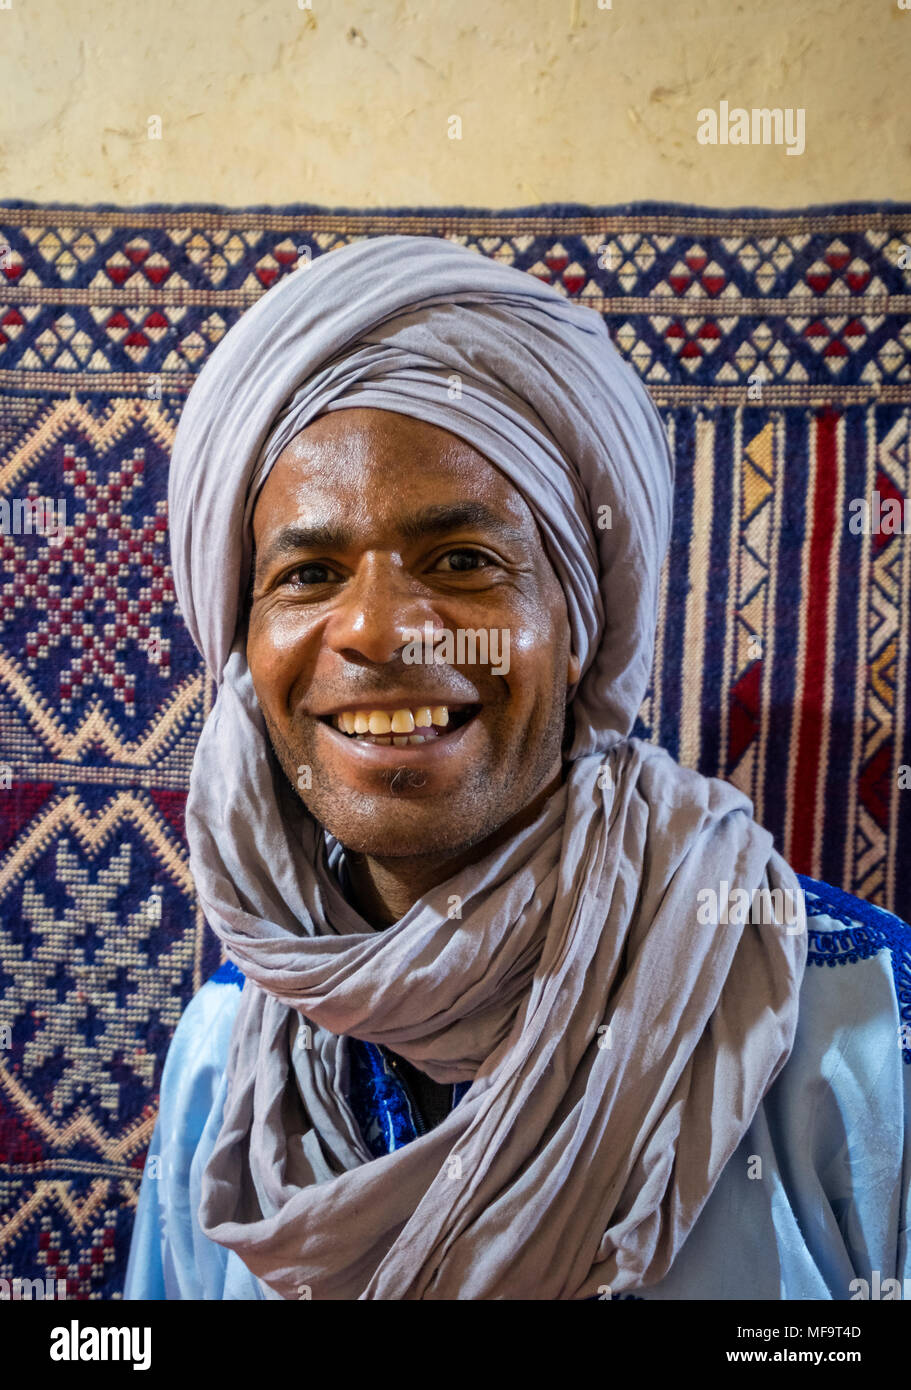 Portrait of a Berber Man in traditional dress, Tinghir, High Atlas, Morocco Stock Photo